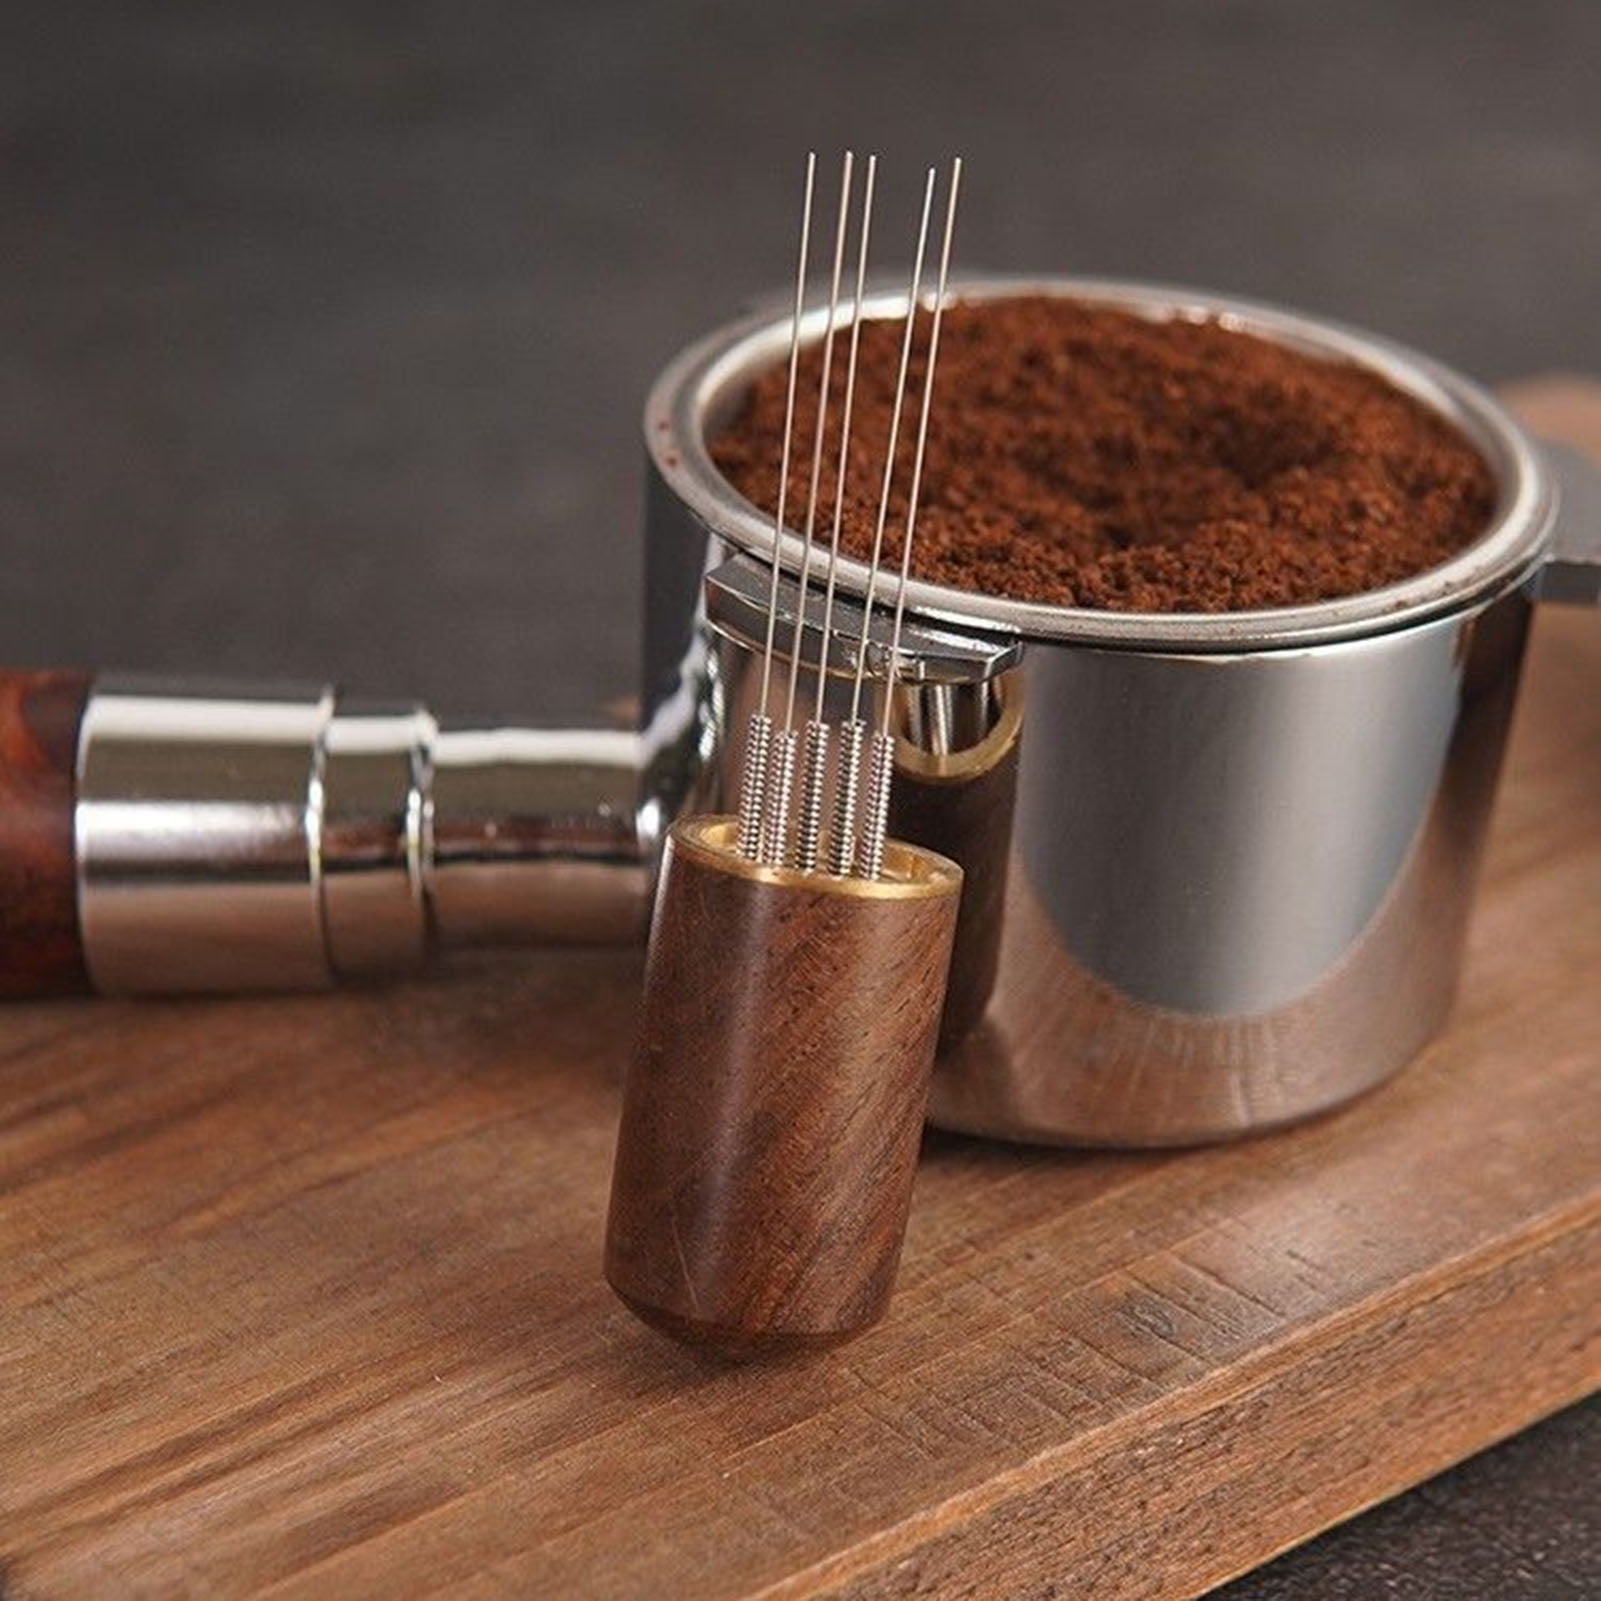 Stainless Steel Coffee Stirrers - FLYF250 - IdeaStage Promotional